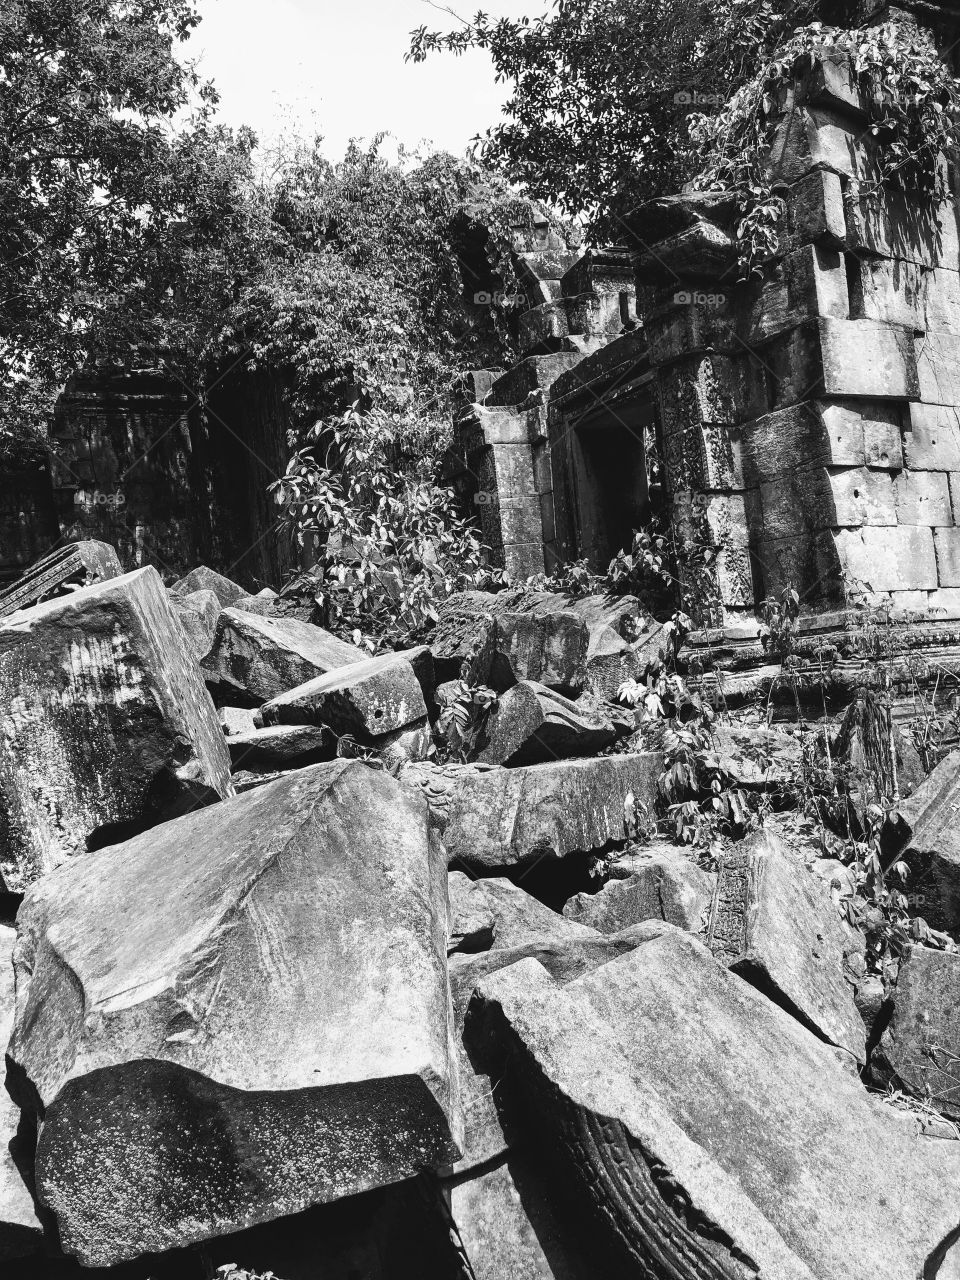 Black and White. Possible Flooded Ruins in the past. Cambodia. Nature vs. Architecture and Spirit with Nature. 